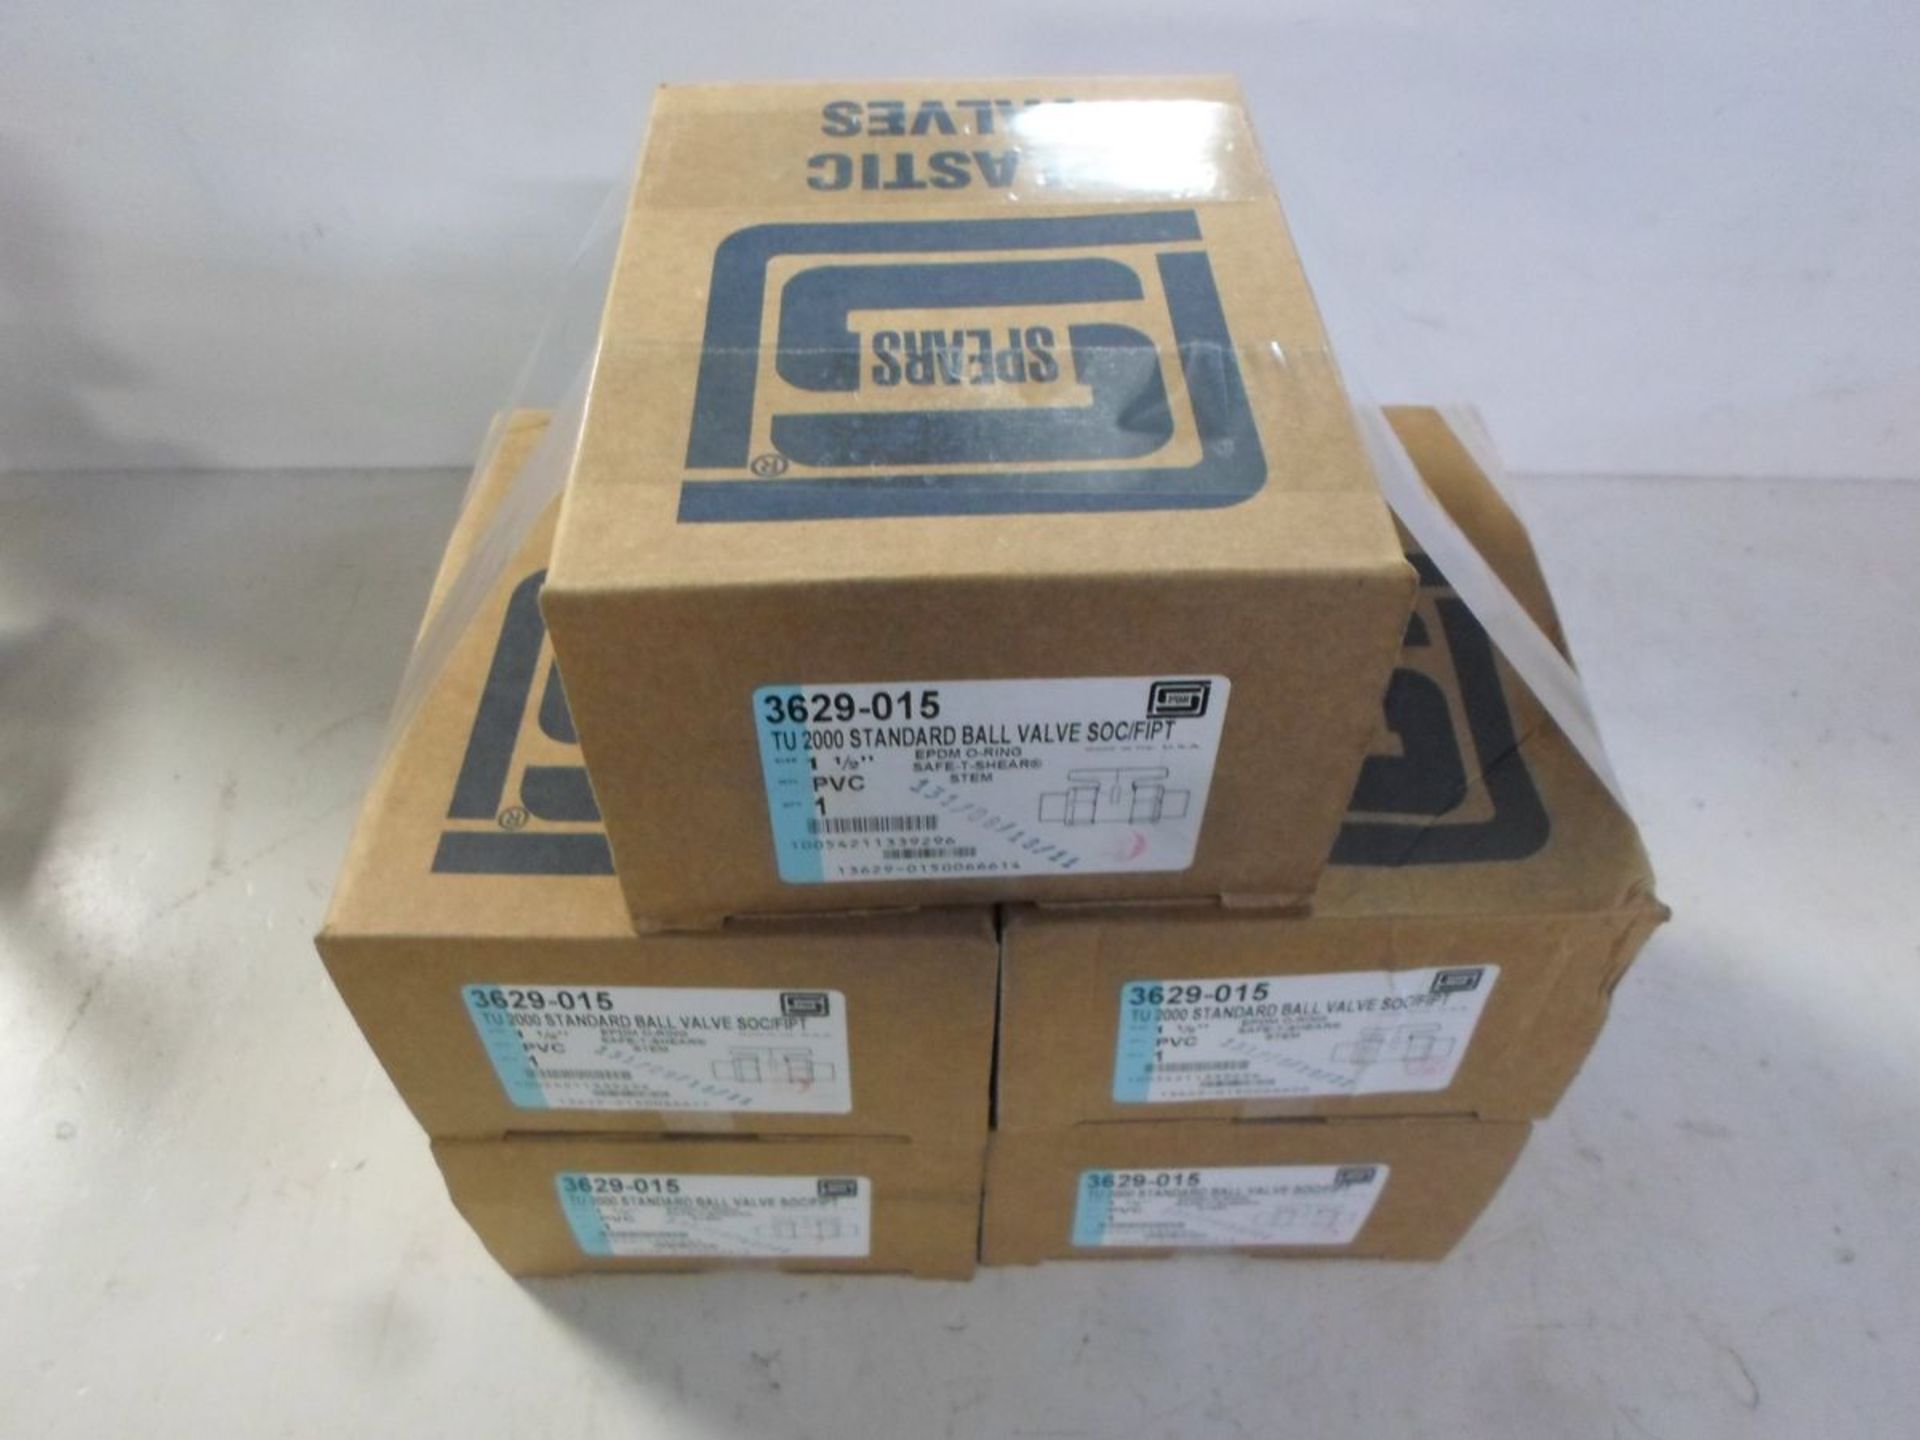 LOT OF FIVE NEW BOXES SPEARS 3629-015 TU 2000 STANDARD BALL VALVE 1 1/2" ONE IN EACH BOX